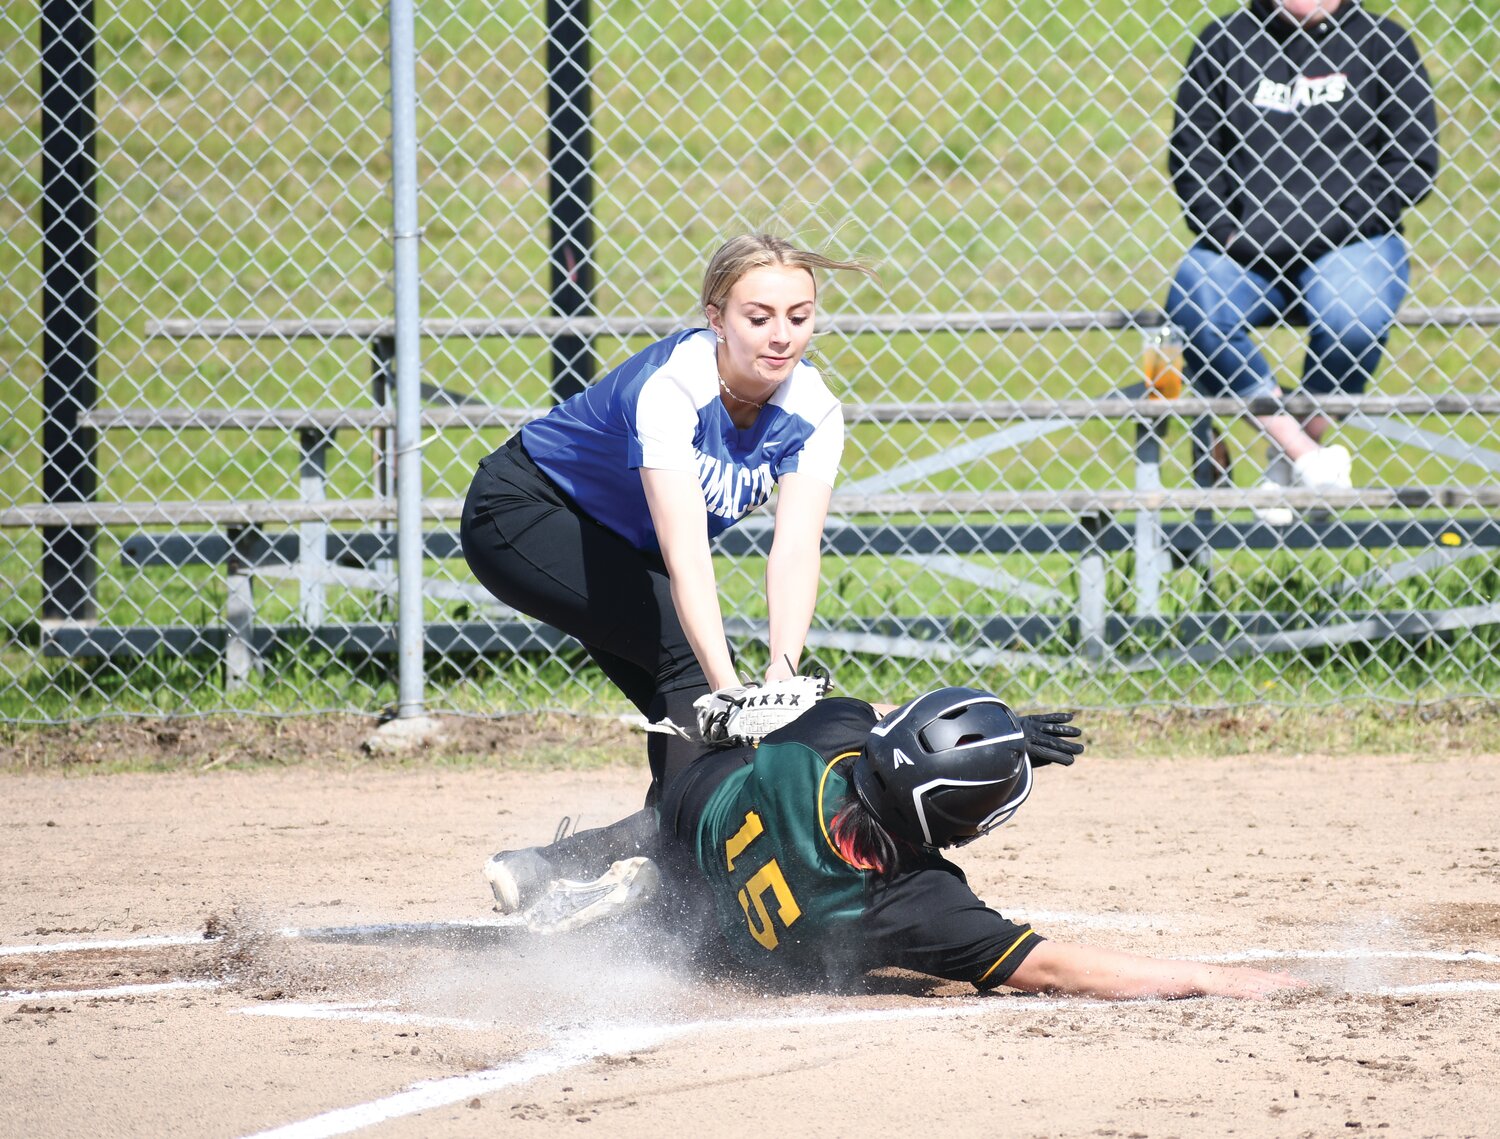 Senior pitcher Macy Aumock attempts to tag out a Pirate player sliding into home base.